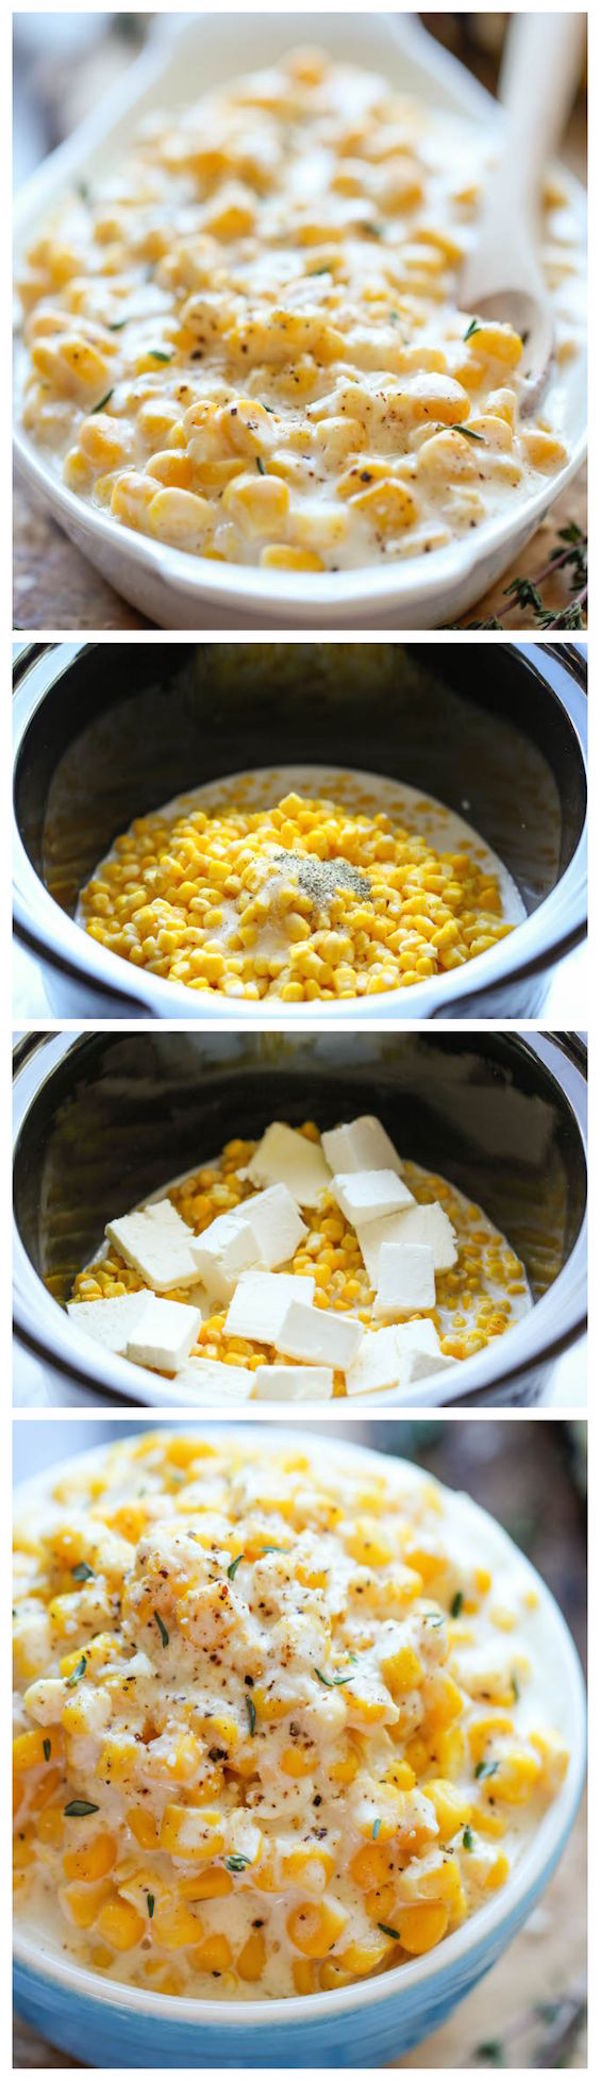 Slow Cooker Creamed Corn - So rich and creamy, and unbelievably easy to make with just 5 ingredients. Doesn't get easier than that!